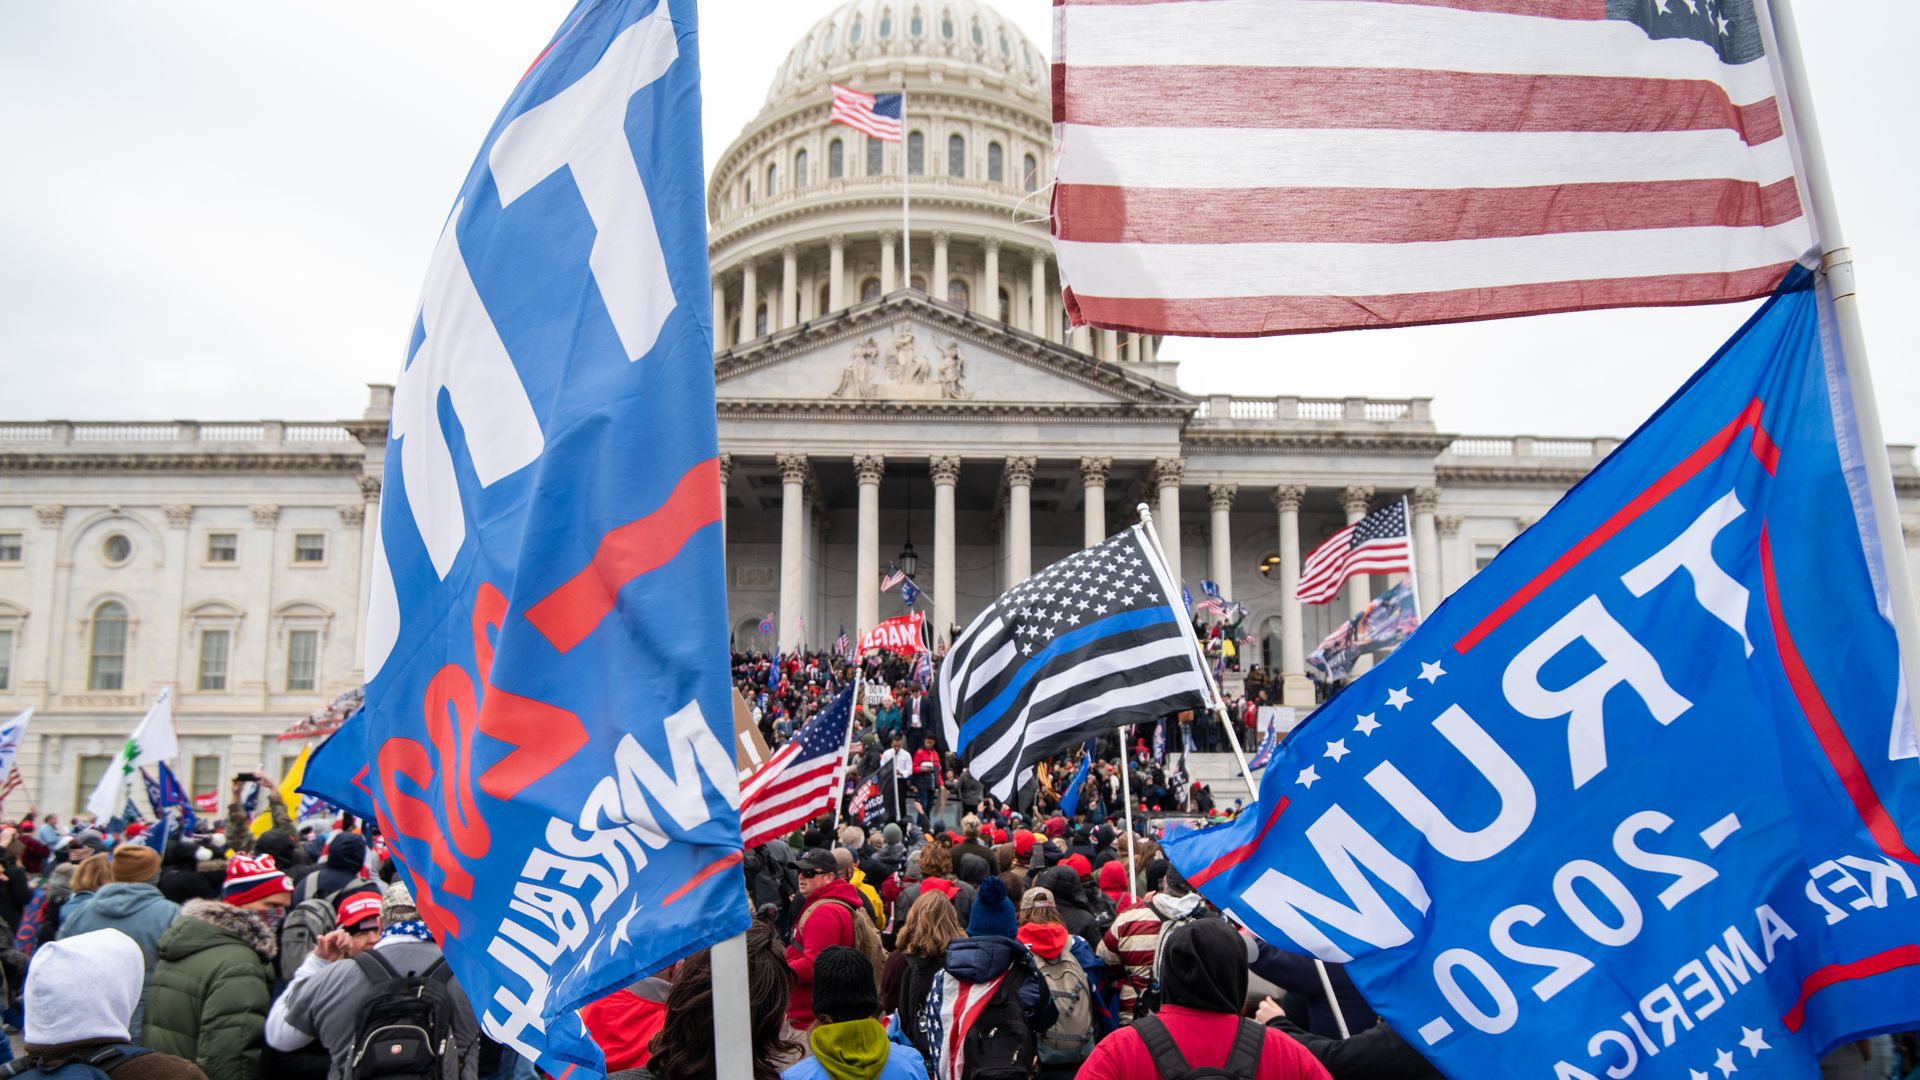 People carry Trump flags during the Jan. 6, 2021, riots outside the U.S. Capitol